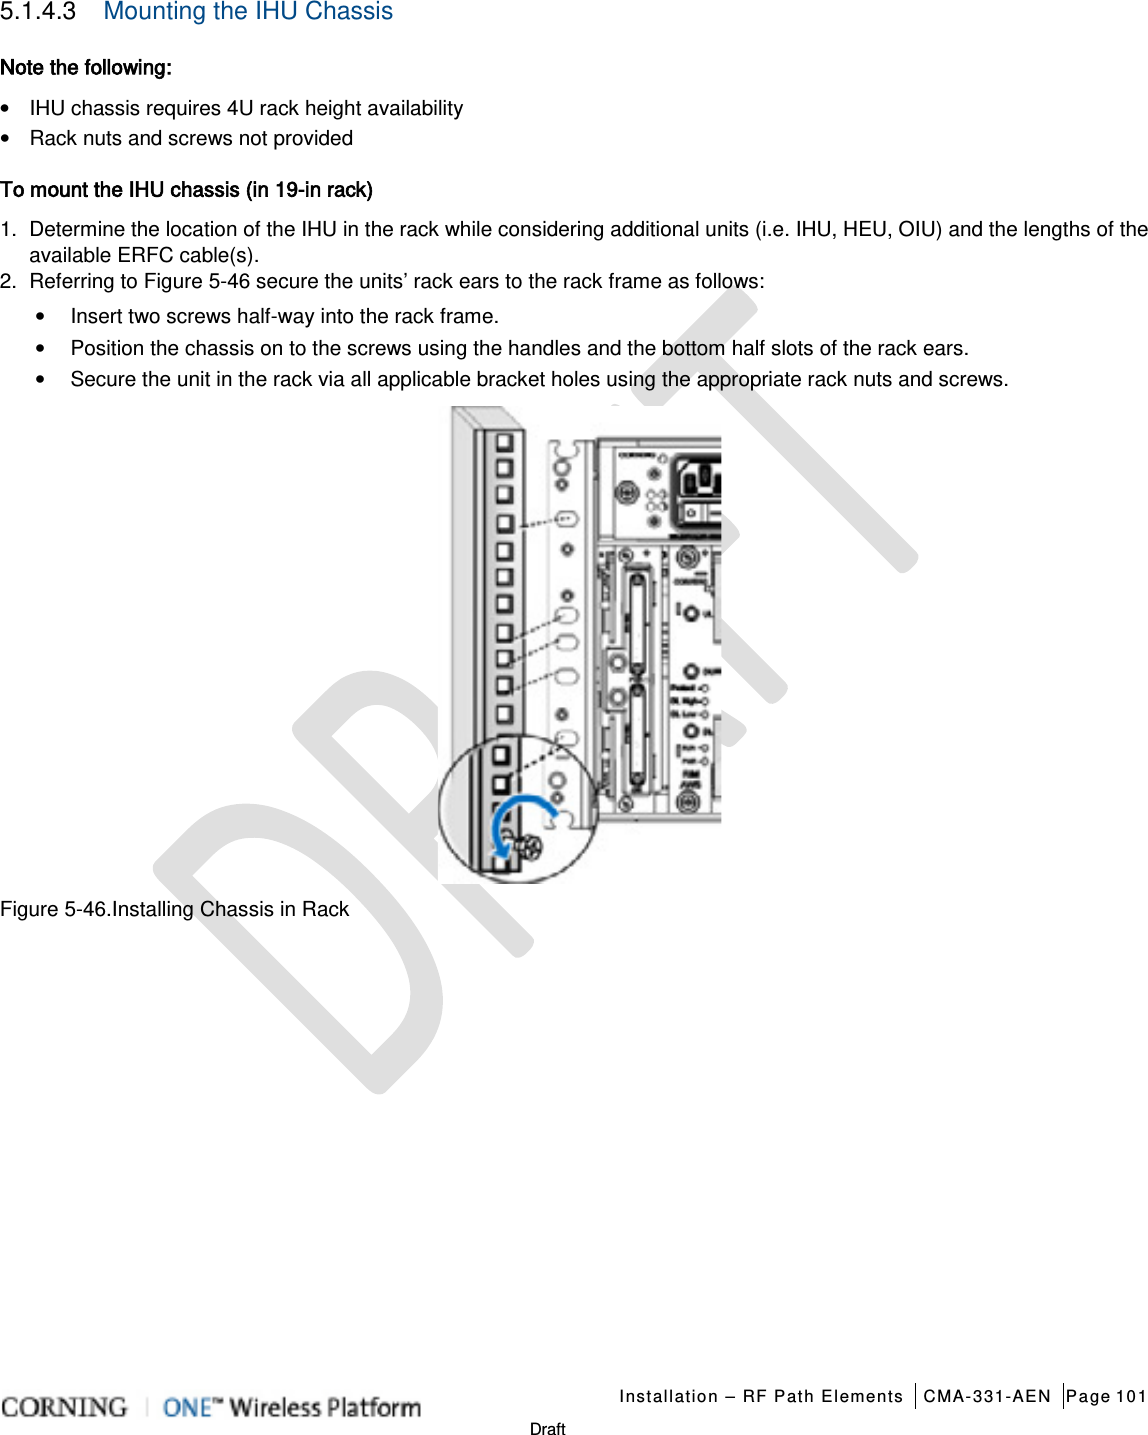   Installation – RF Path Elements CMA-331-AEN Page 101   Draft 5.1.4.3  Mounting the IHU Chassis Note the following: • IHU chassis requires 4U rack height availability • Rack nuts and screws not provided   To mount the IHU chassis (in 19-in rack) 1.  Determine the location of the IHU in the rack while considering additional units (i.e. IHU, HEU, OIU) and the lengths of the available ERFC cable(s). 2.  Referring to Figure  5-46 secure the units’ rack ears to the rack frame as follows: • Insert two screws half-way into the rack frame. • Position the chassis on to the screws using the handles and the bottom half slots of the rack ears. • Secure the unit in the rack via all applicable bracket holes using the appropriate rack nuts and screws.  Figure  5-46.Installing Chassis in Rack   